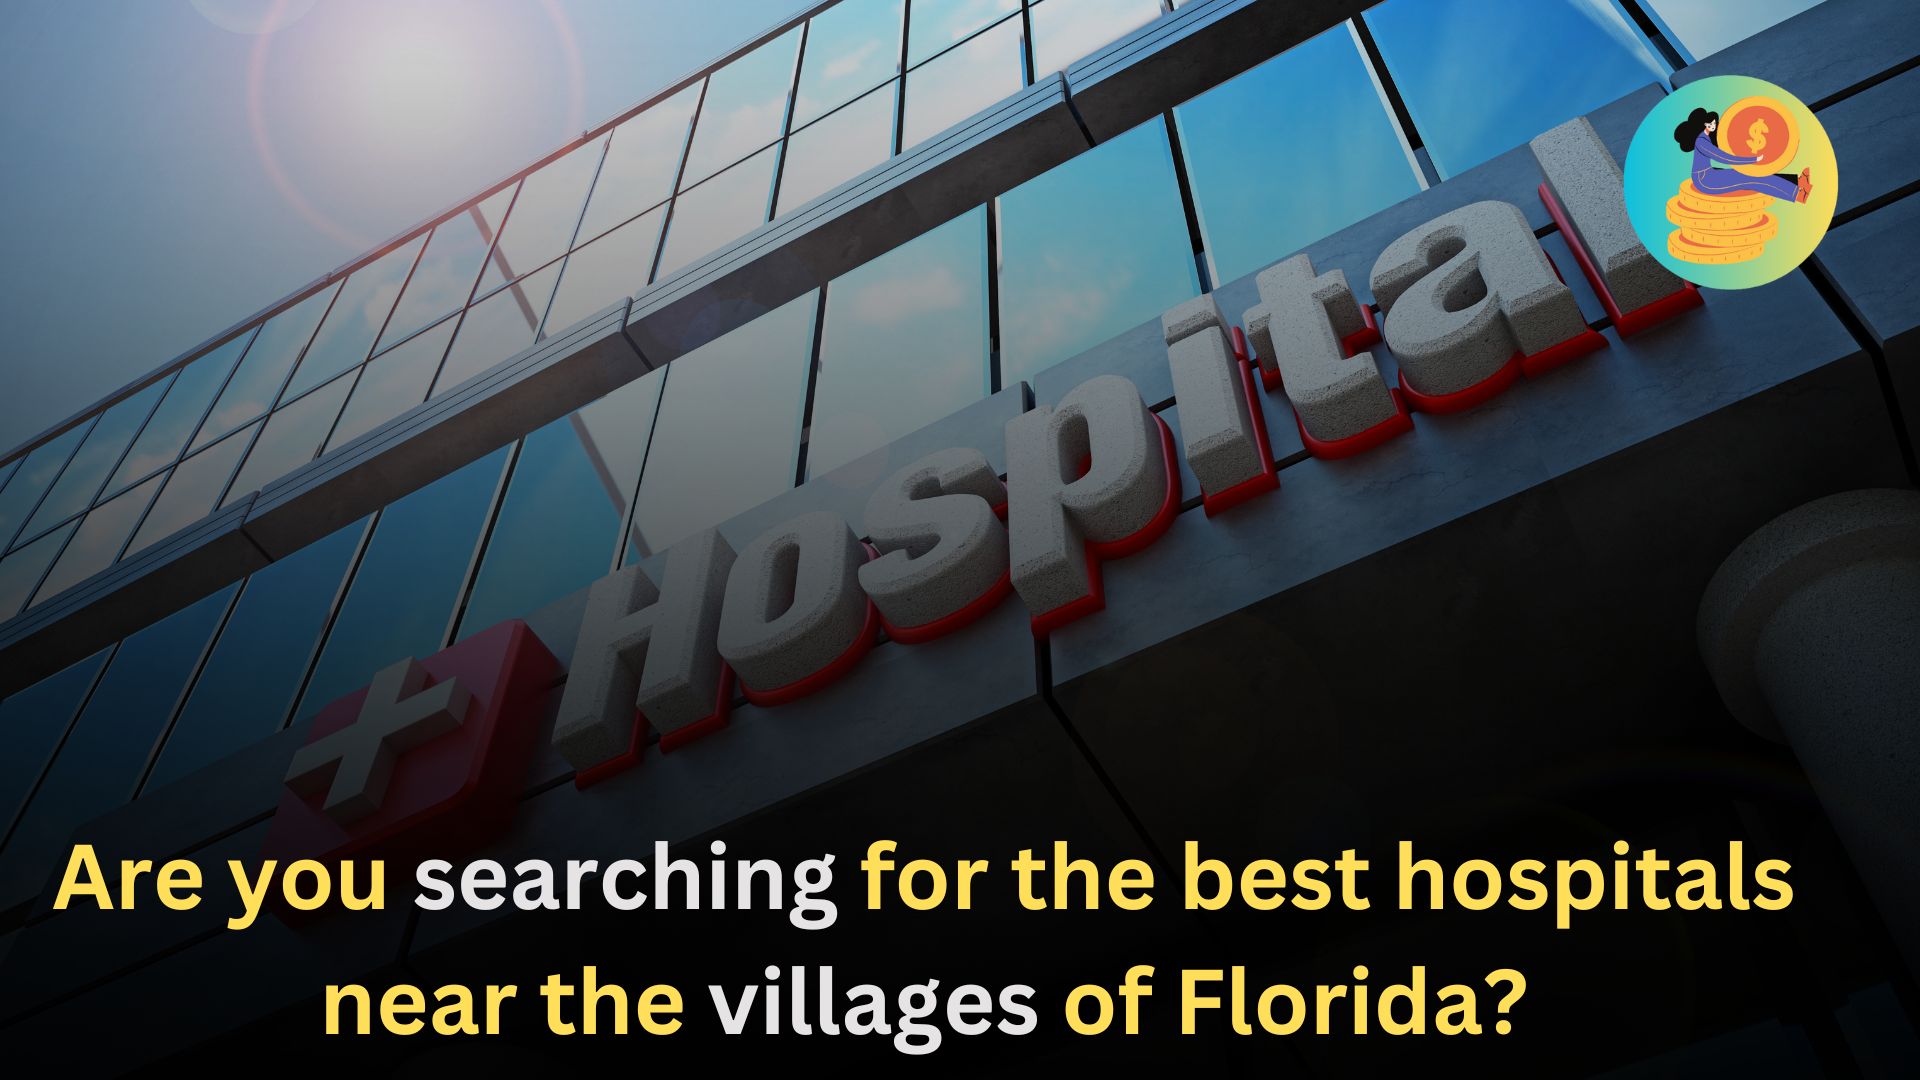 Are you searching for the best hospitals near the villages of Florida